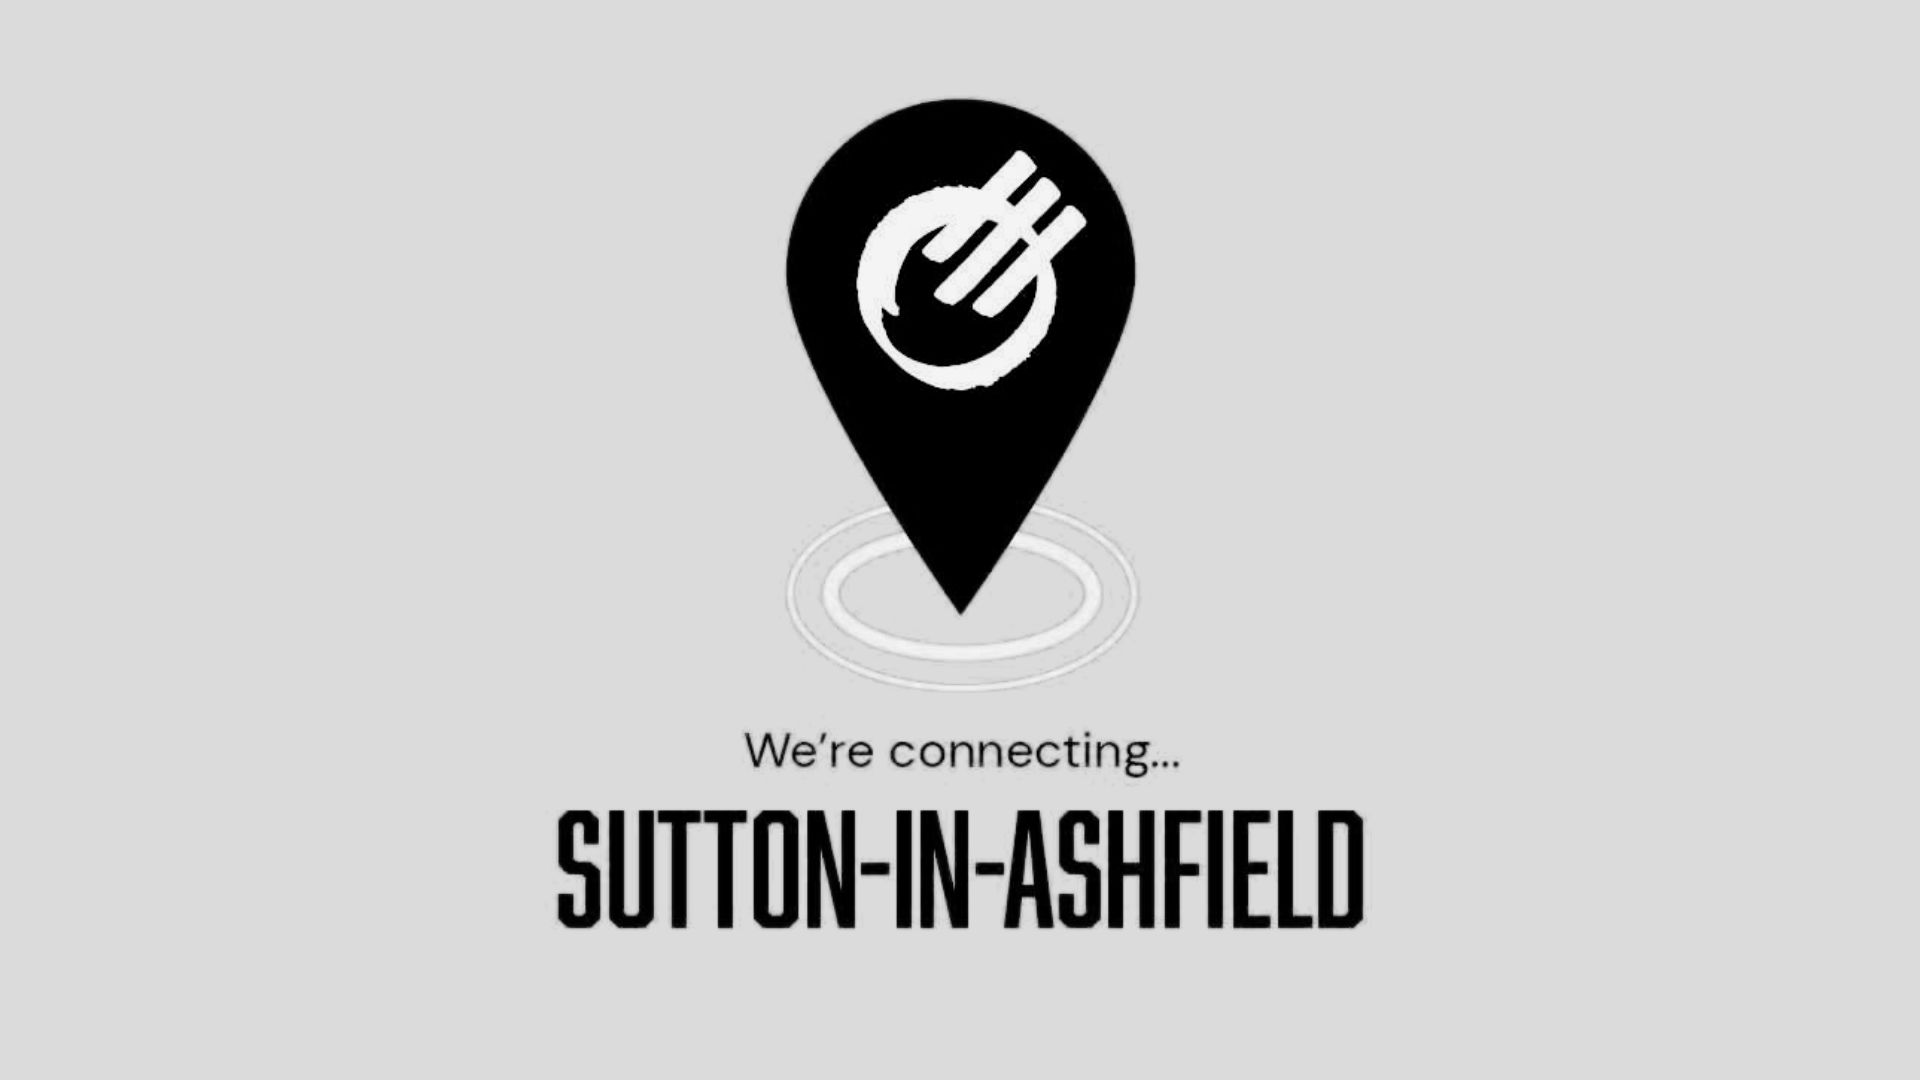 YouFibre Expands Its Reach to Sutton-in-Ashfield with Ultrafast Internet Services